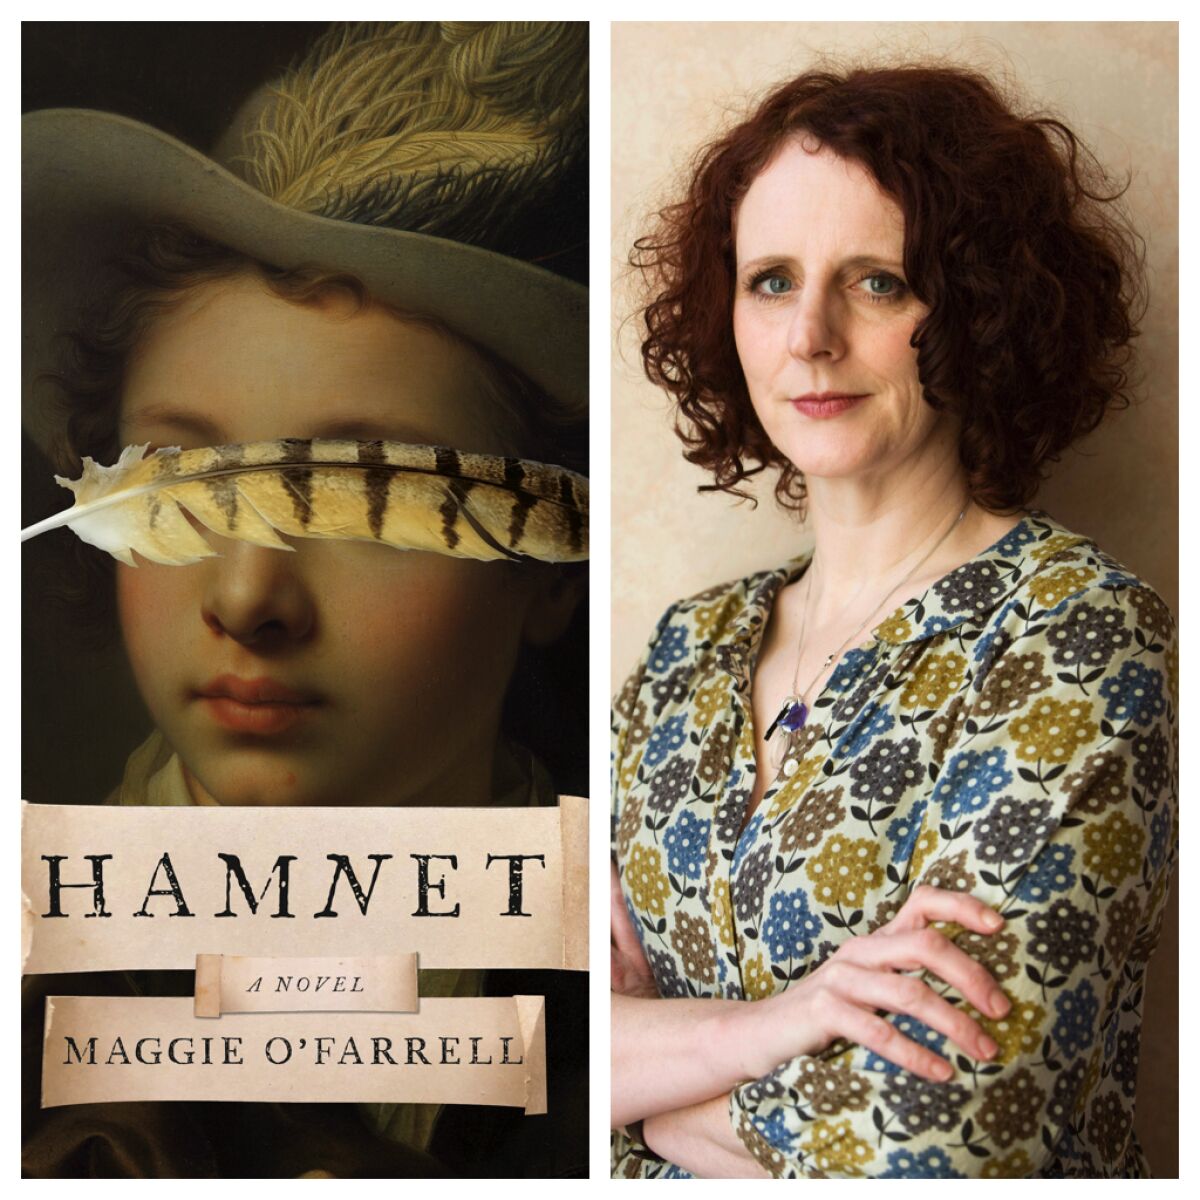 Maggie O'Farrell's most recent novel, “Hamnet," is based on the death of Shakespeare's son.